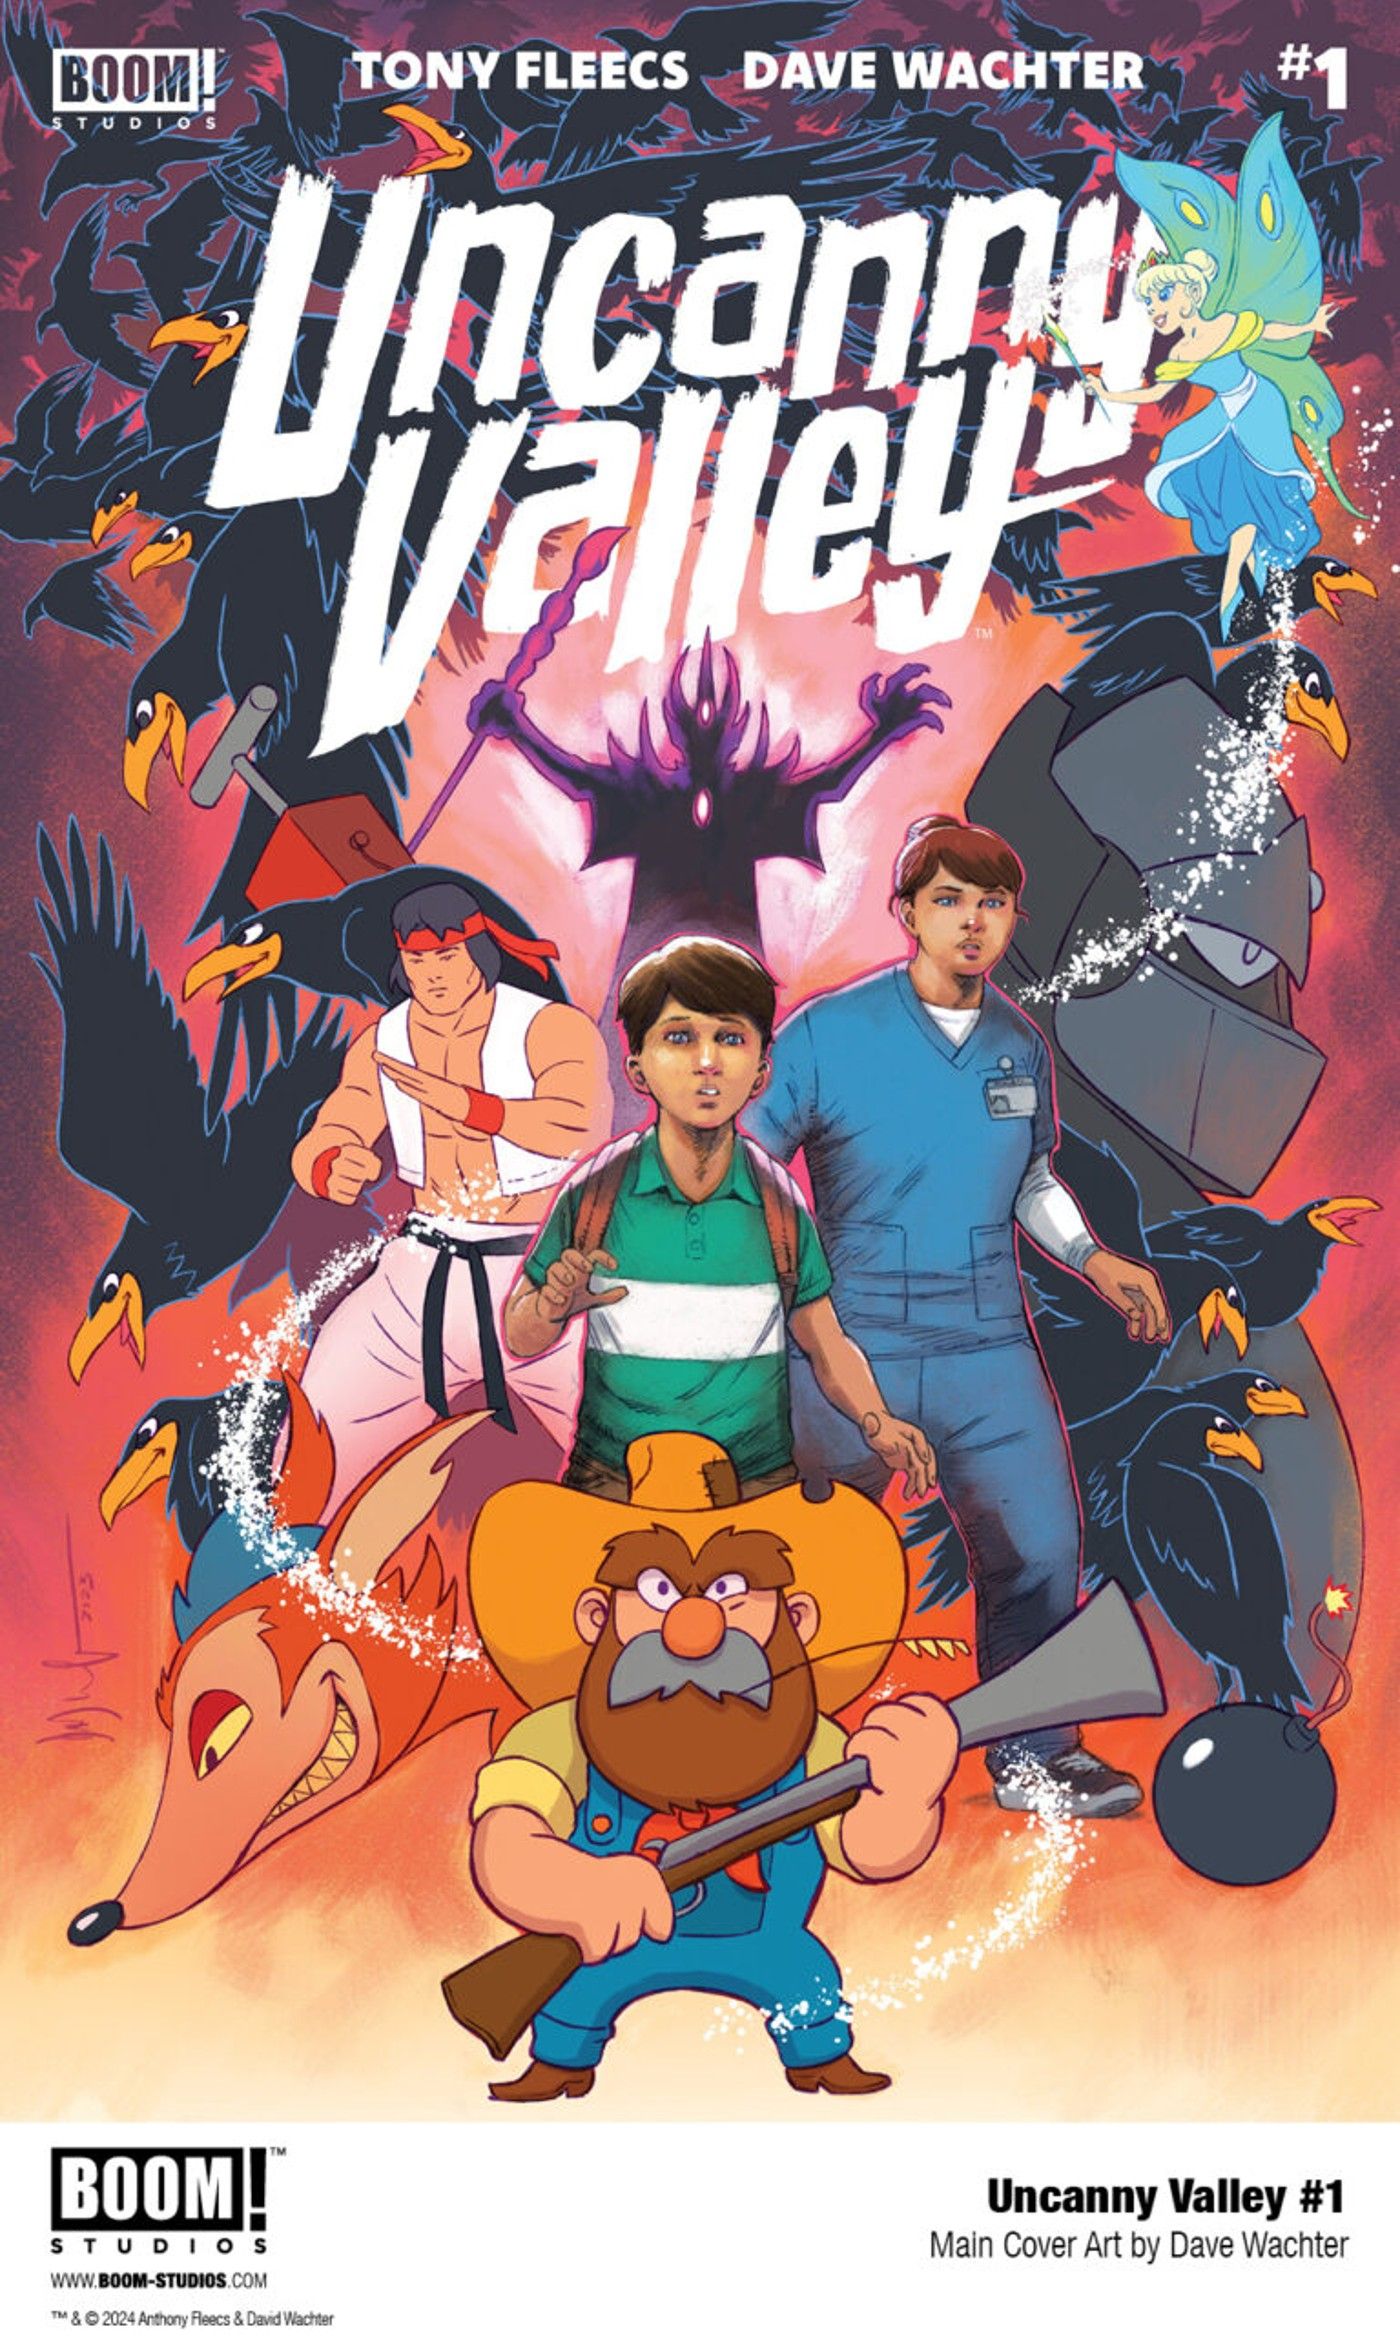 UNCANNY VALLEY’s Epic First Trailer Mixes Cartoon Violence & Family Drama (Exclusive)